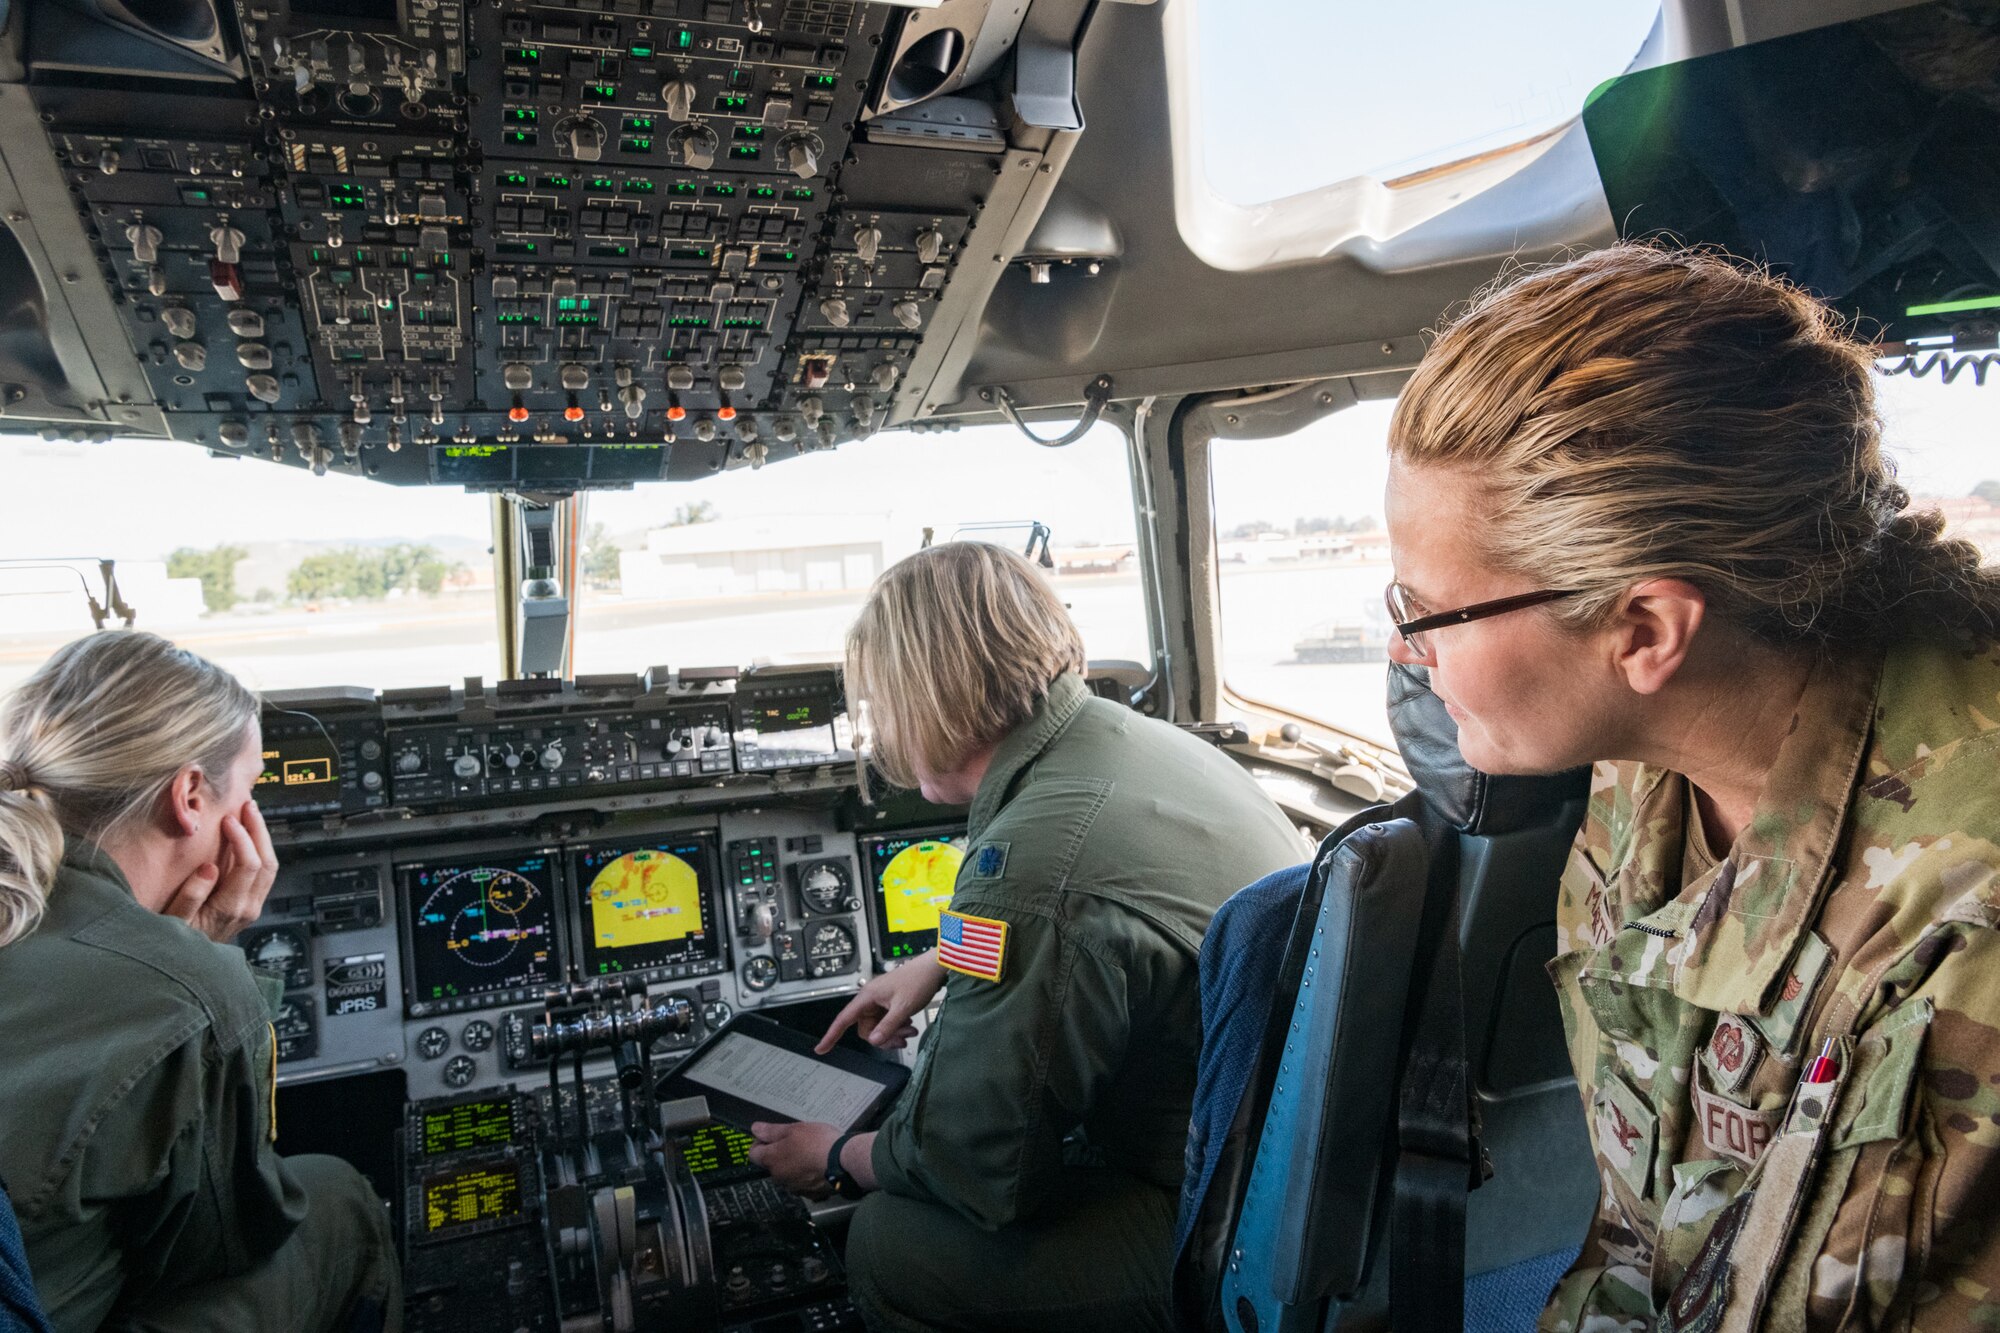 It's not every day that an all-female aircrew gets to go up in U.S. Air Force C-17 Globemaster III for a training flight.  For former pilots like soon to be retiring, Col. Jacquelyn Marty, 349th AMW vice commander, this was an opportunity that at one time was unheard of to fly with an all-female aircrew. 
"I'm thrilled and only hope as we go forward , it's not a big deal, but a natural occurrence," said Marty. Marty will soon be retiring in June after 32 years of service.